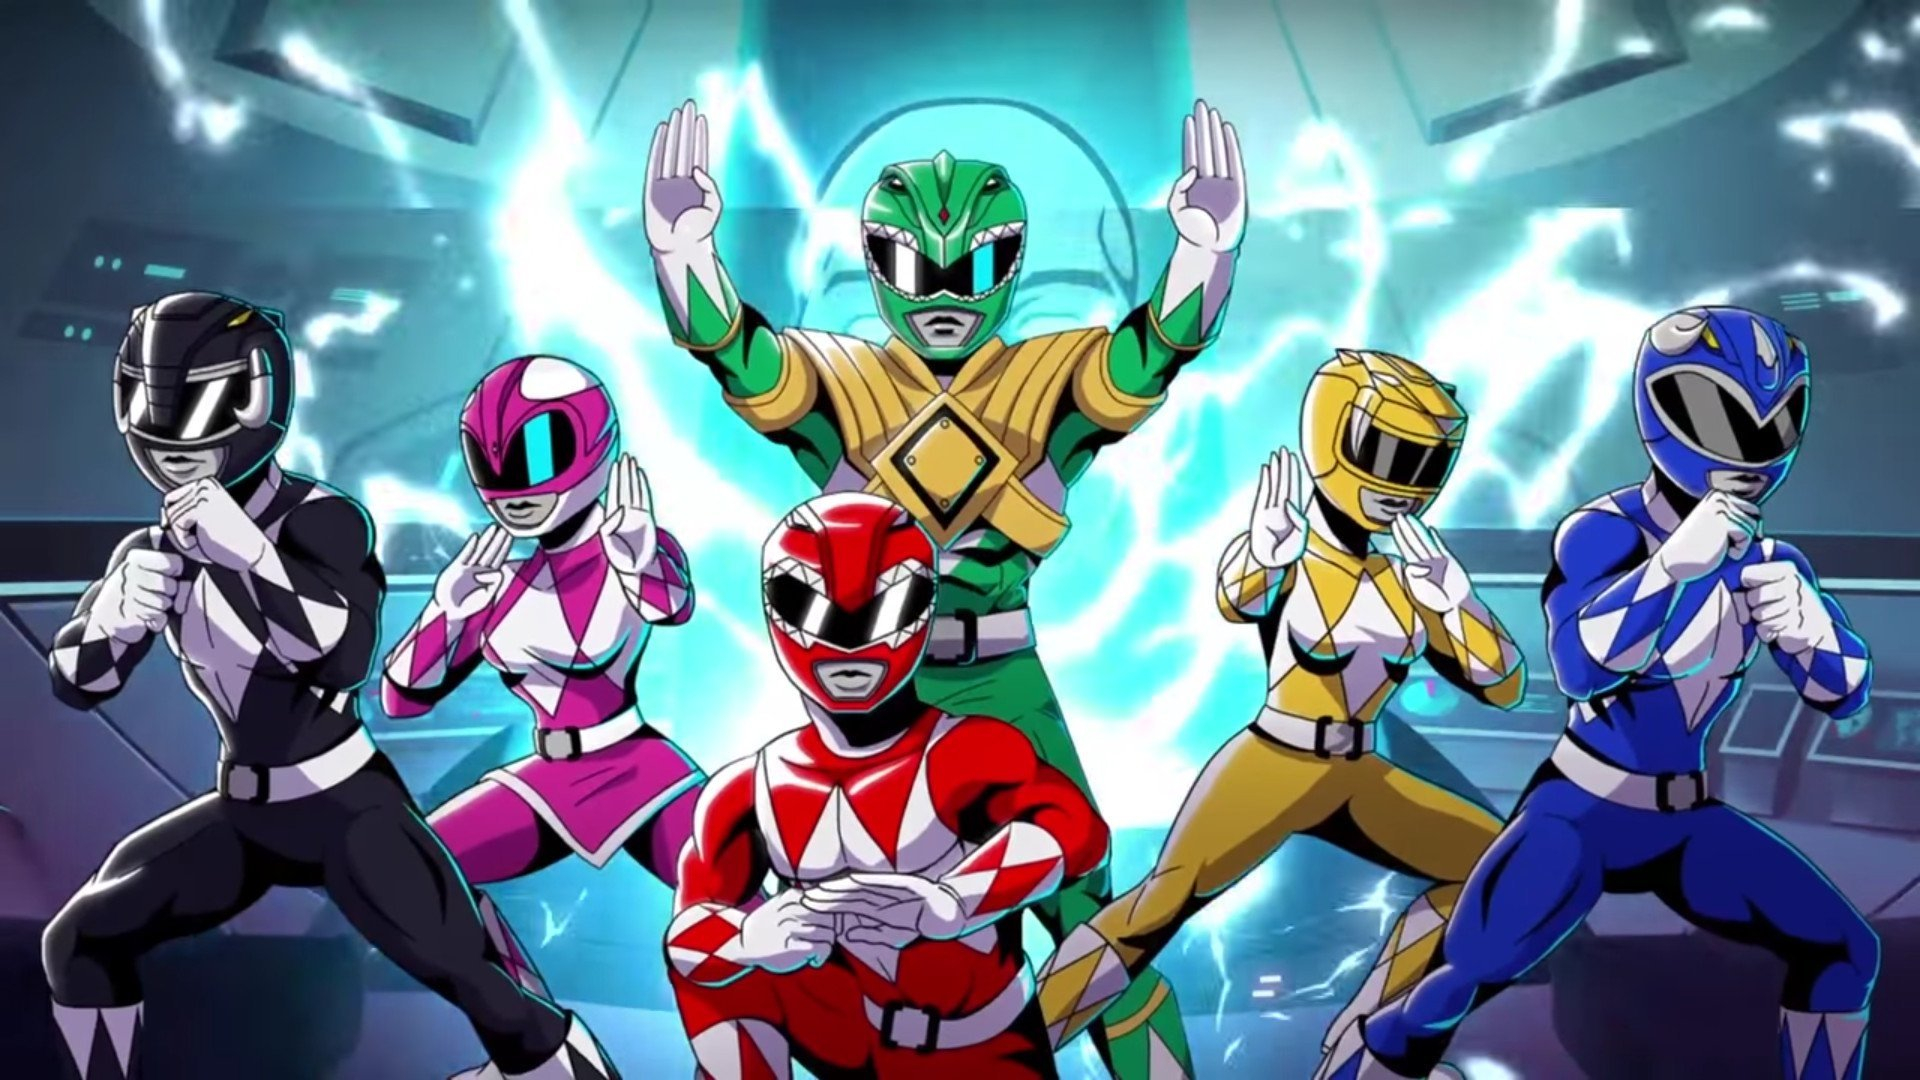 1920x1080 Mighty Morphin Power Rangers: Mega Battle HD Wallpapers and Backgrounds